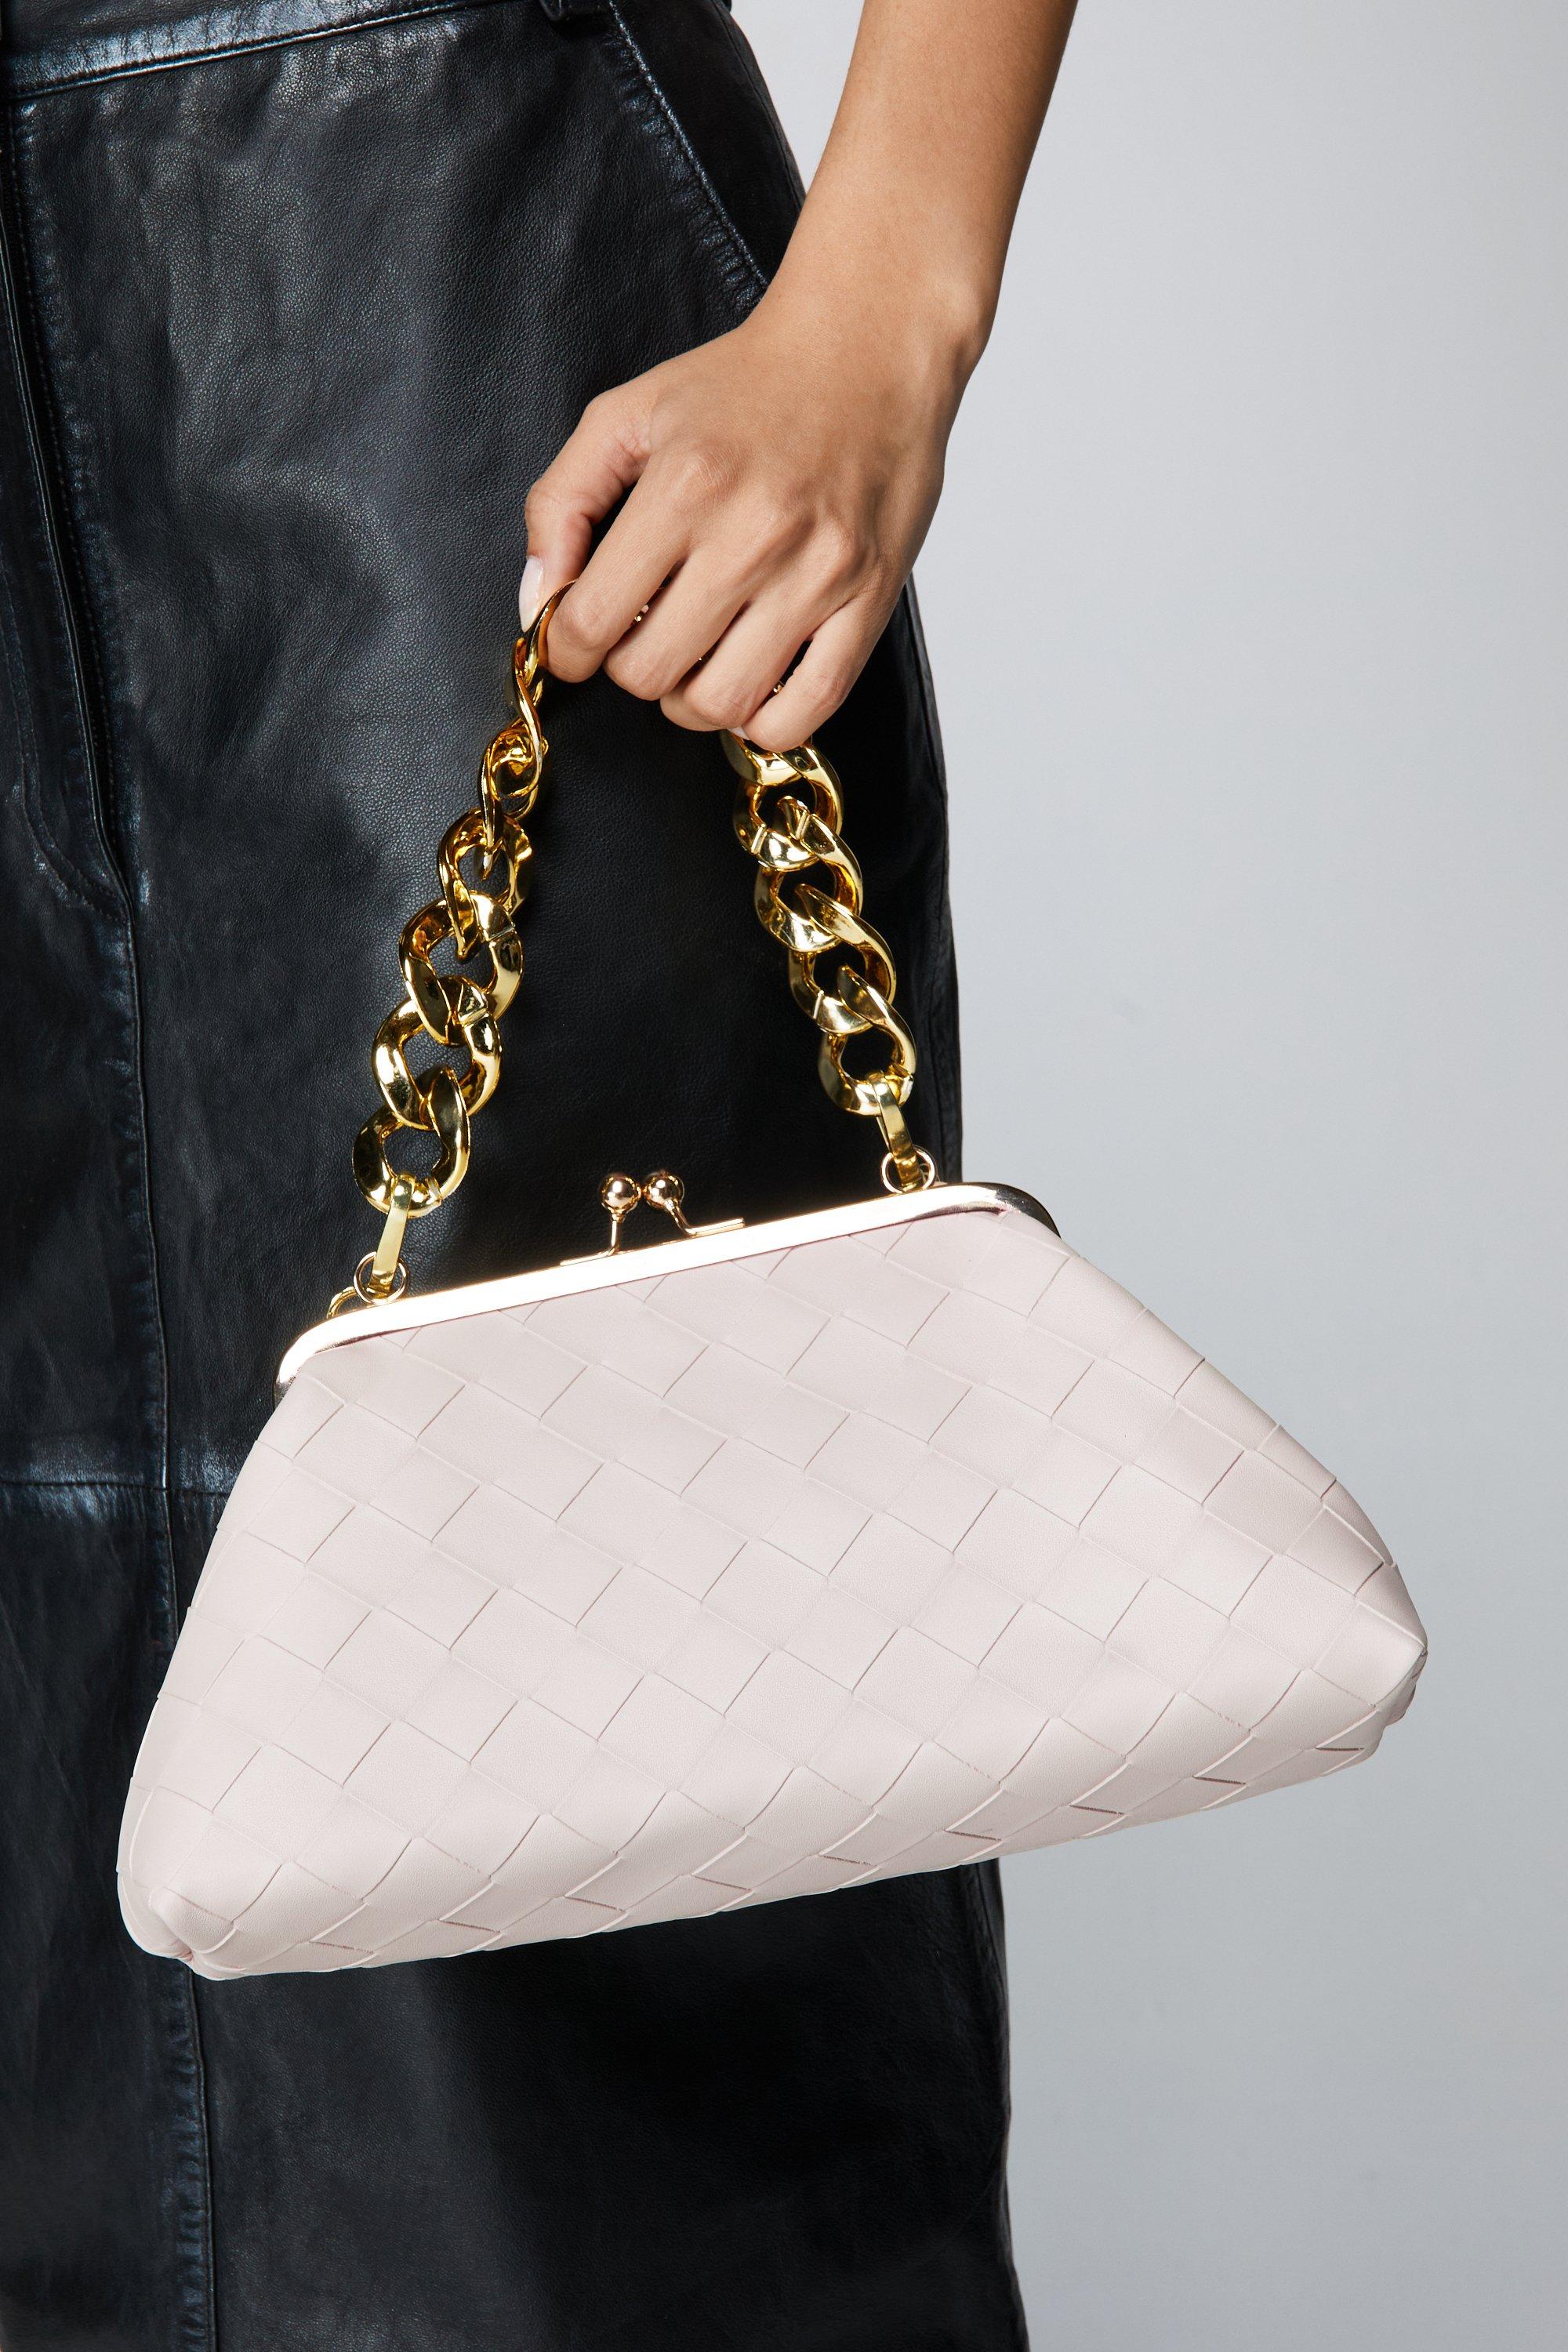 Nasty Gal Sells Vintage Chanel Bags, Clothing, and Jewelry